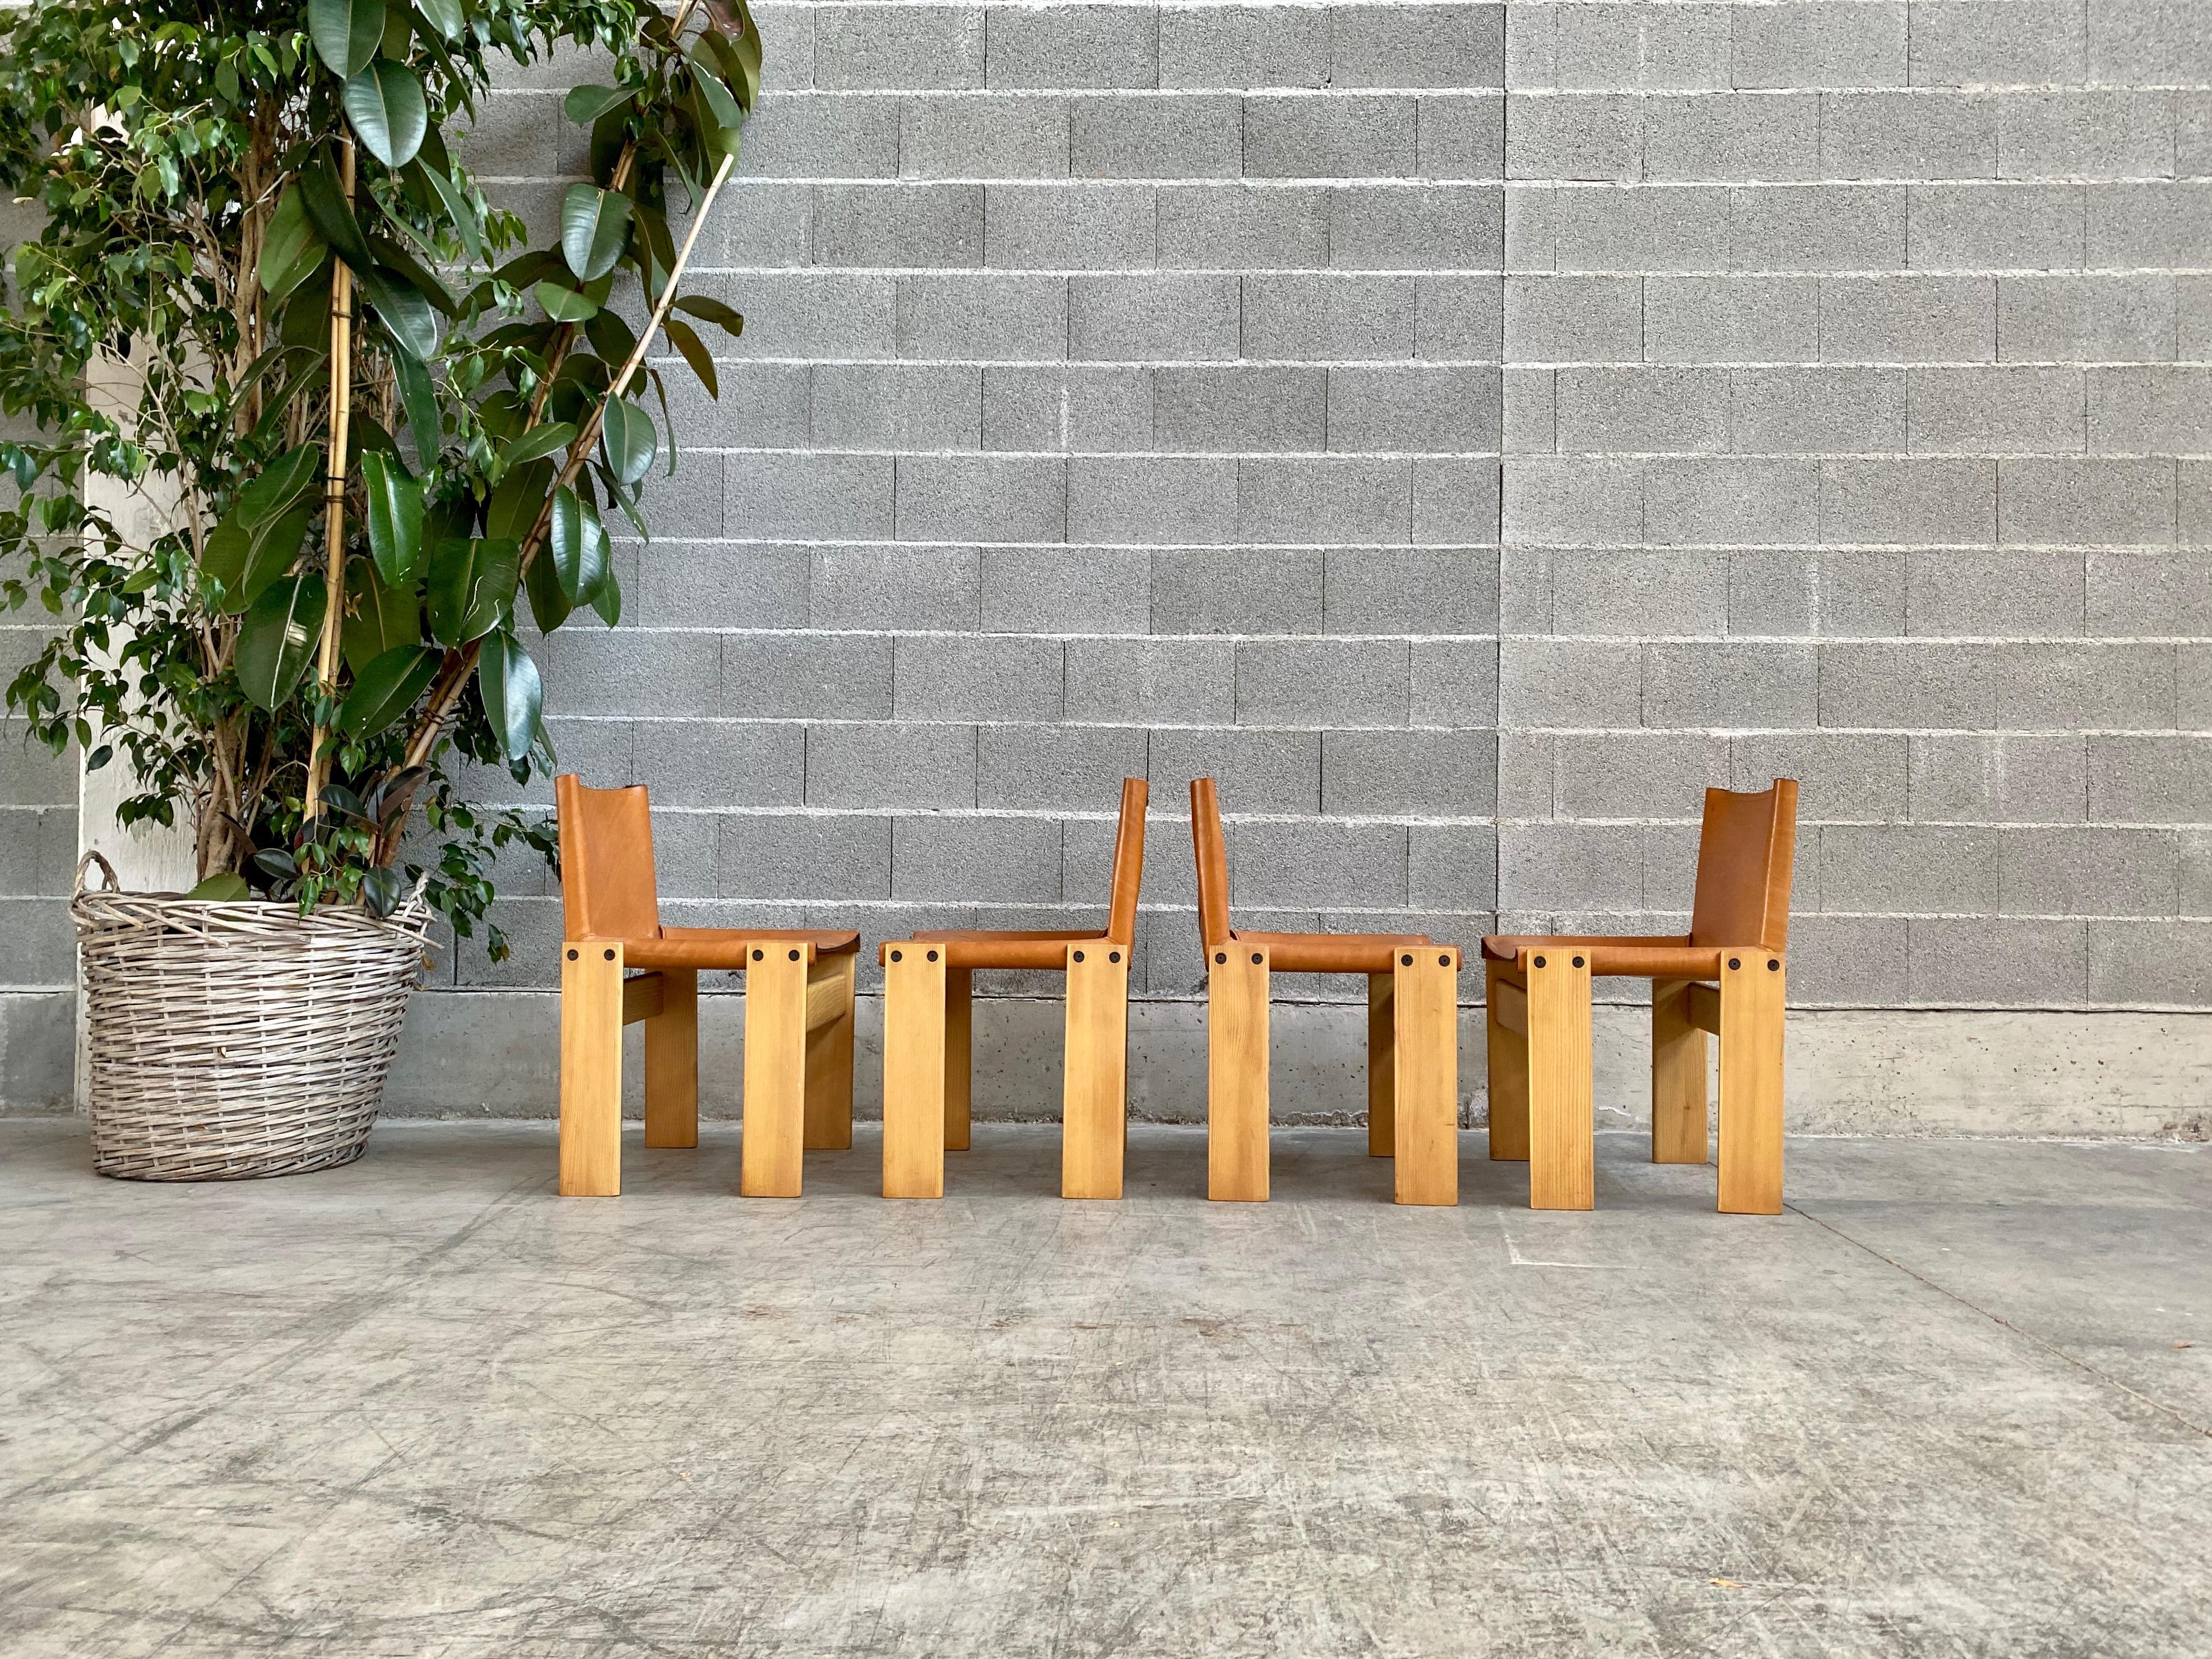 European Afra & Tobia Scarpa “Monk” Dining Chairs for Molteni, 1973, Set of 4